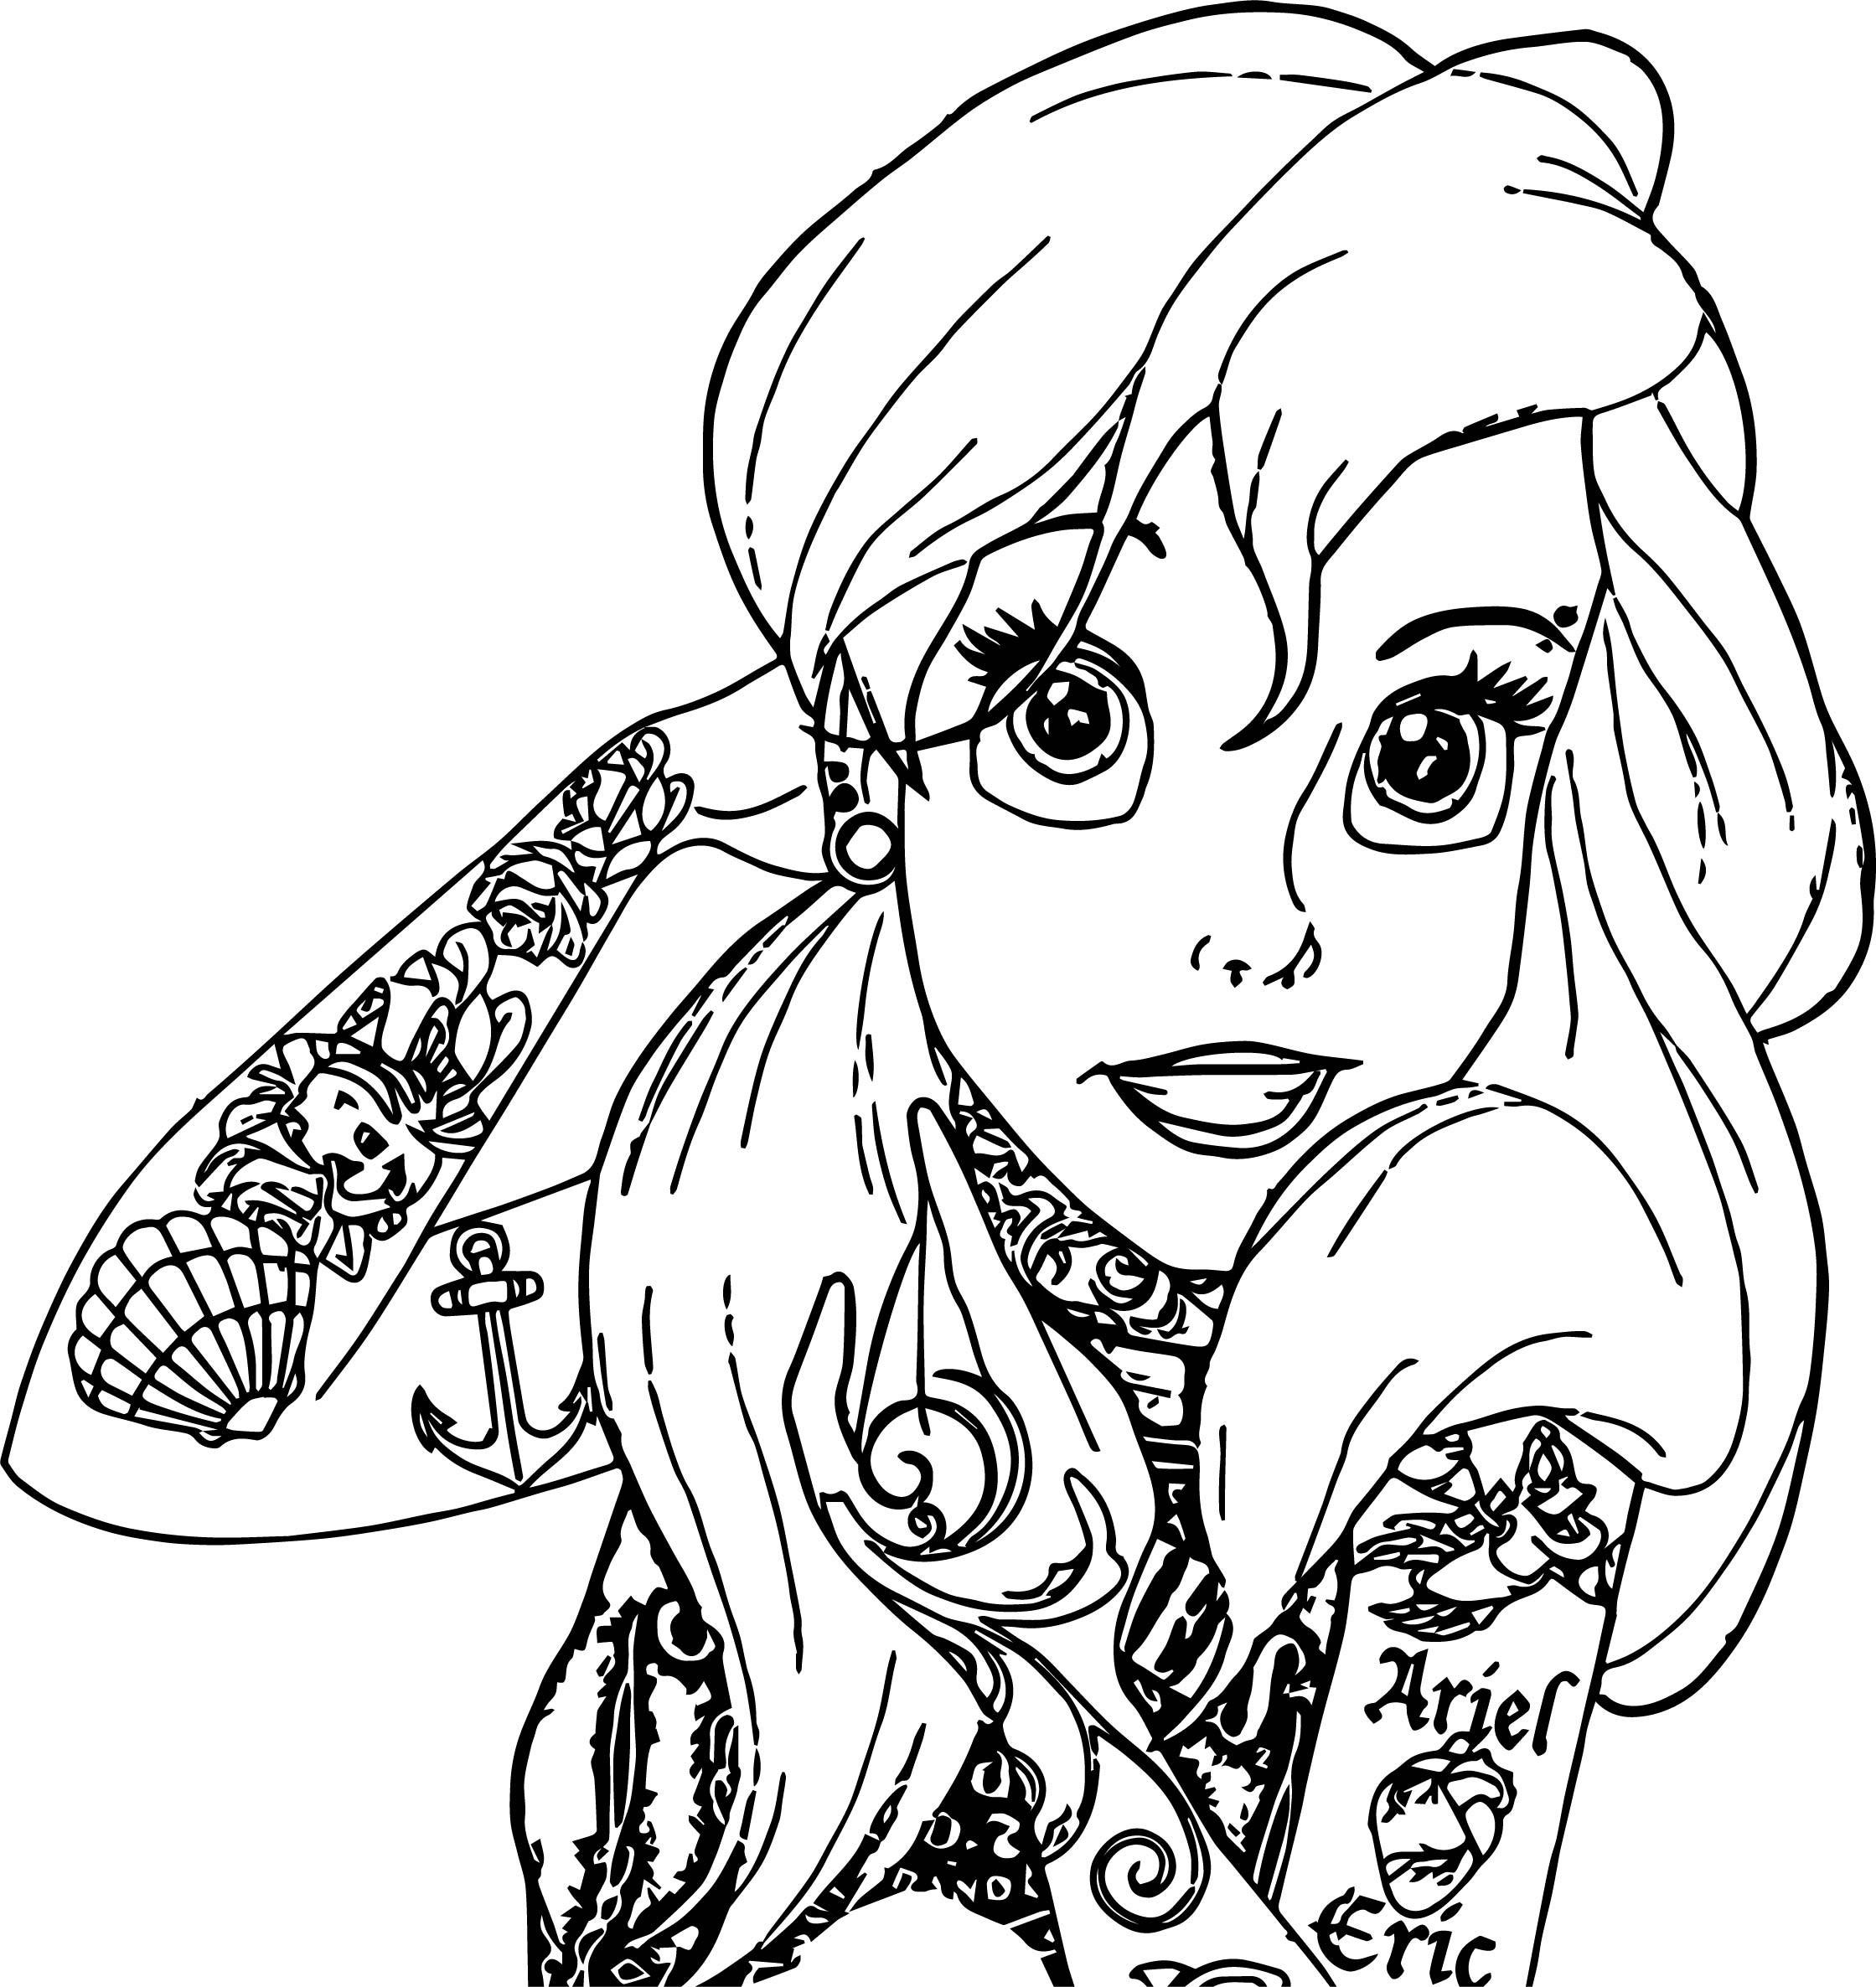 Tattooed Disney Princess Coloring Pages - BubaKids.com